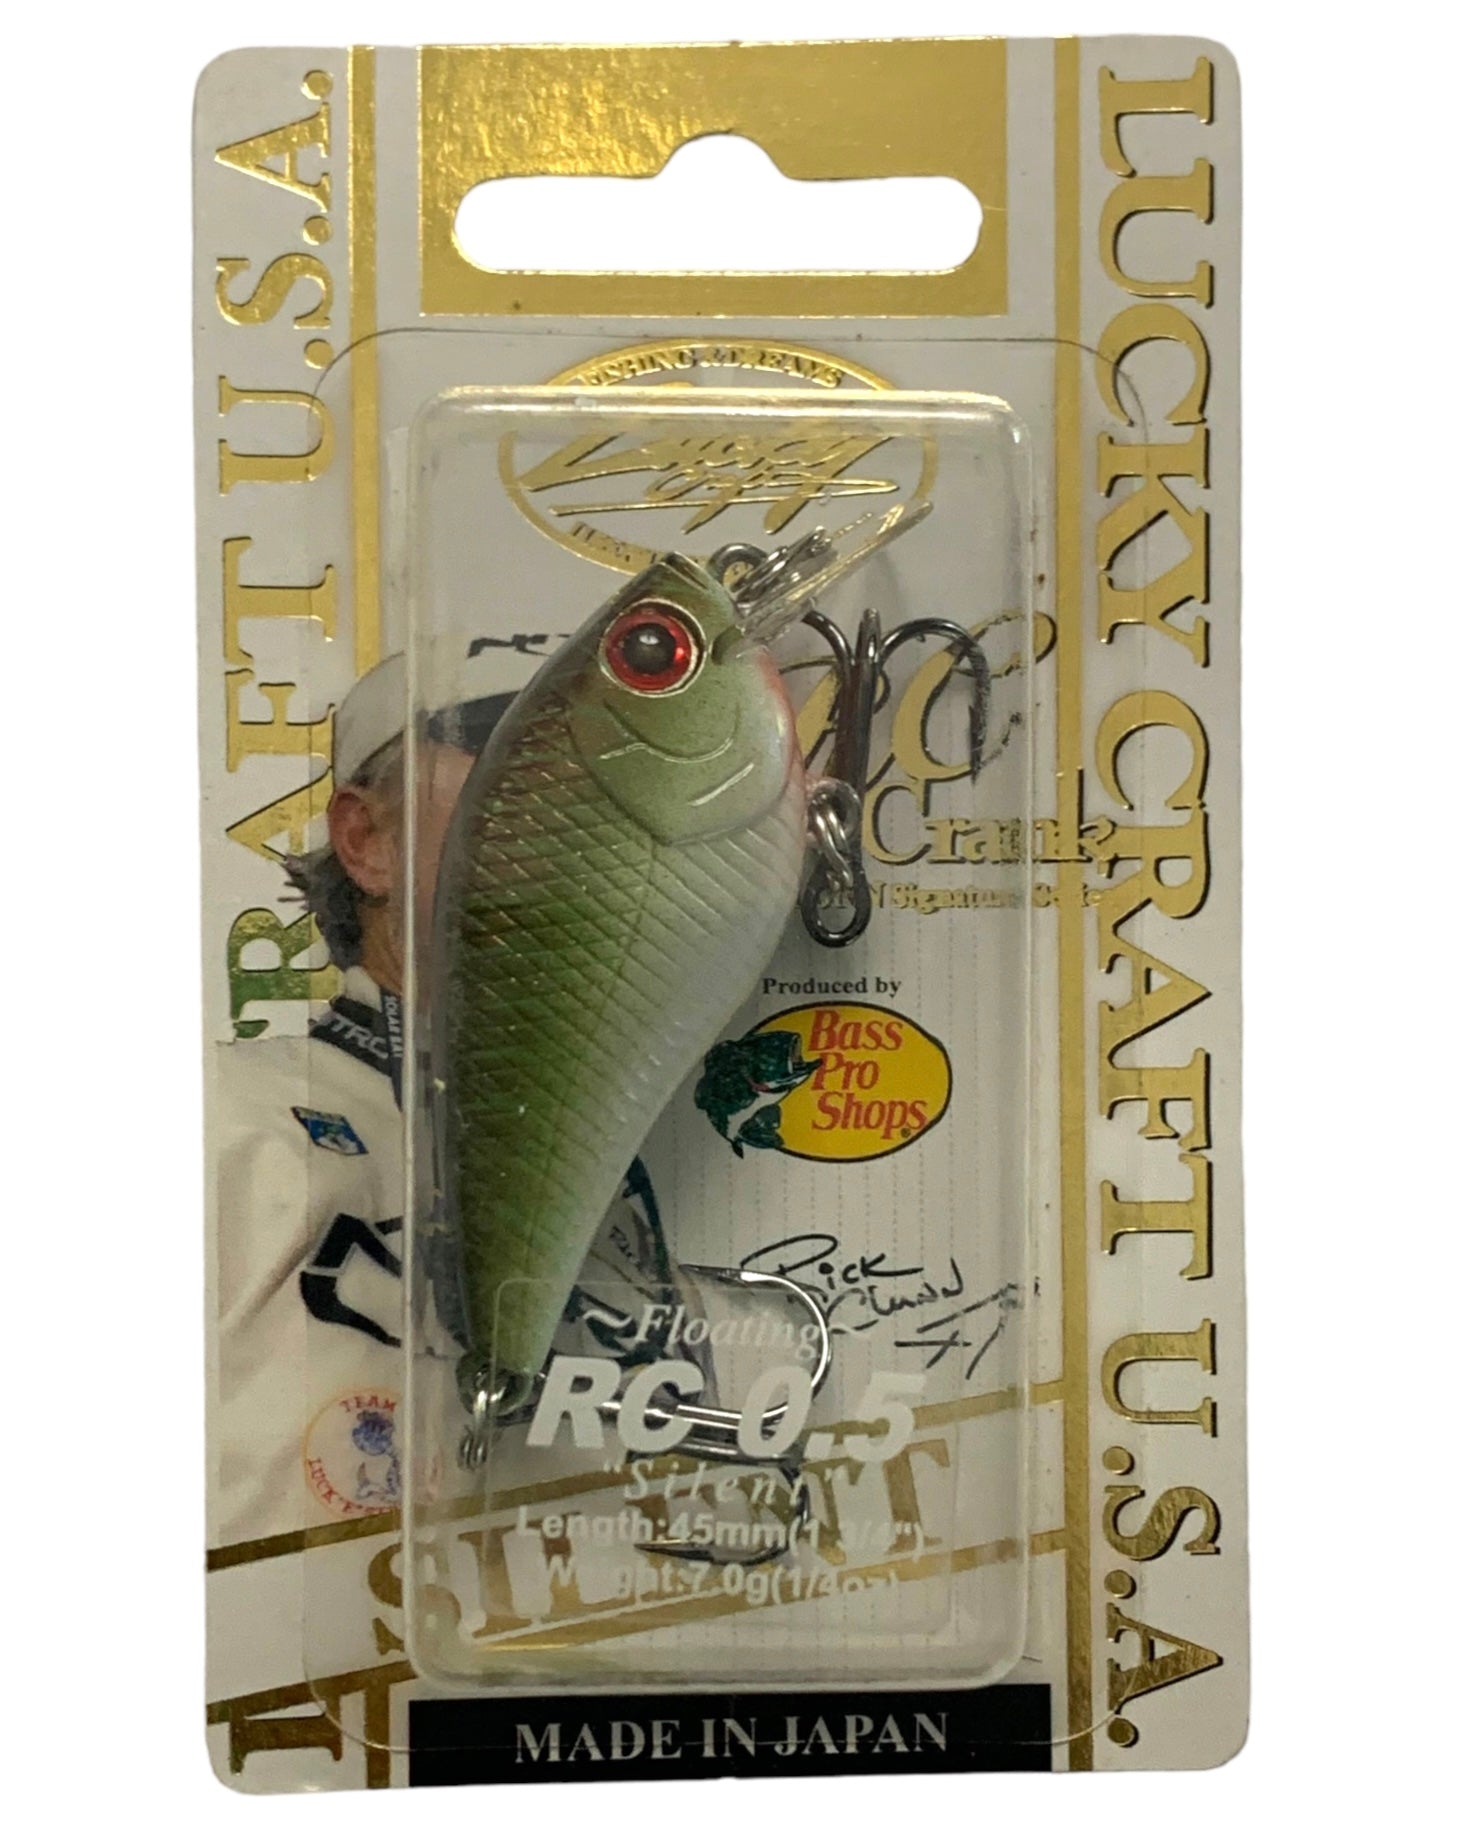 LUCKY CRAFT RC 0.5 CRANK Fishing Lure • COPPER GREEN SHAD – Toad Tackle